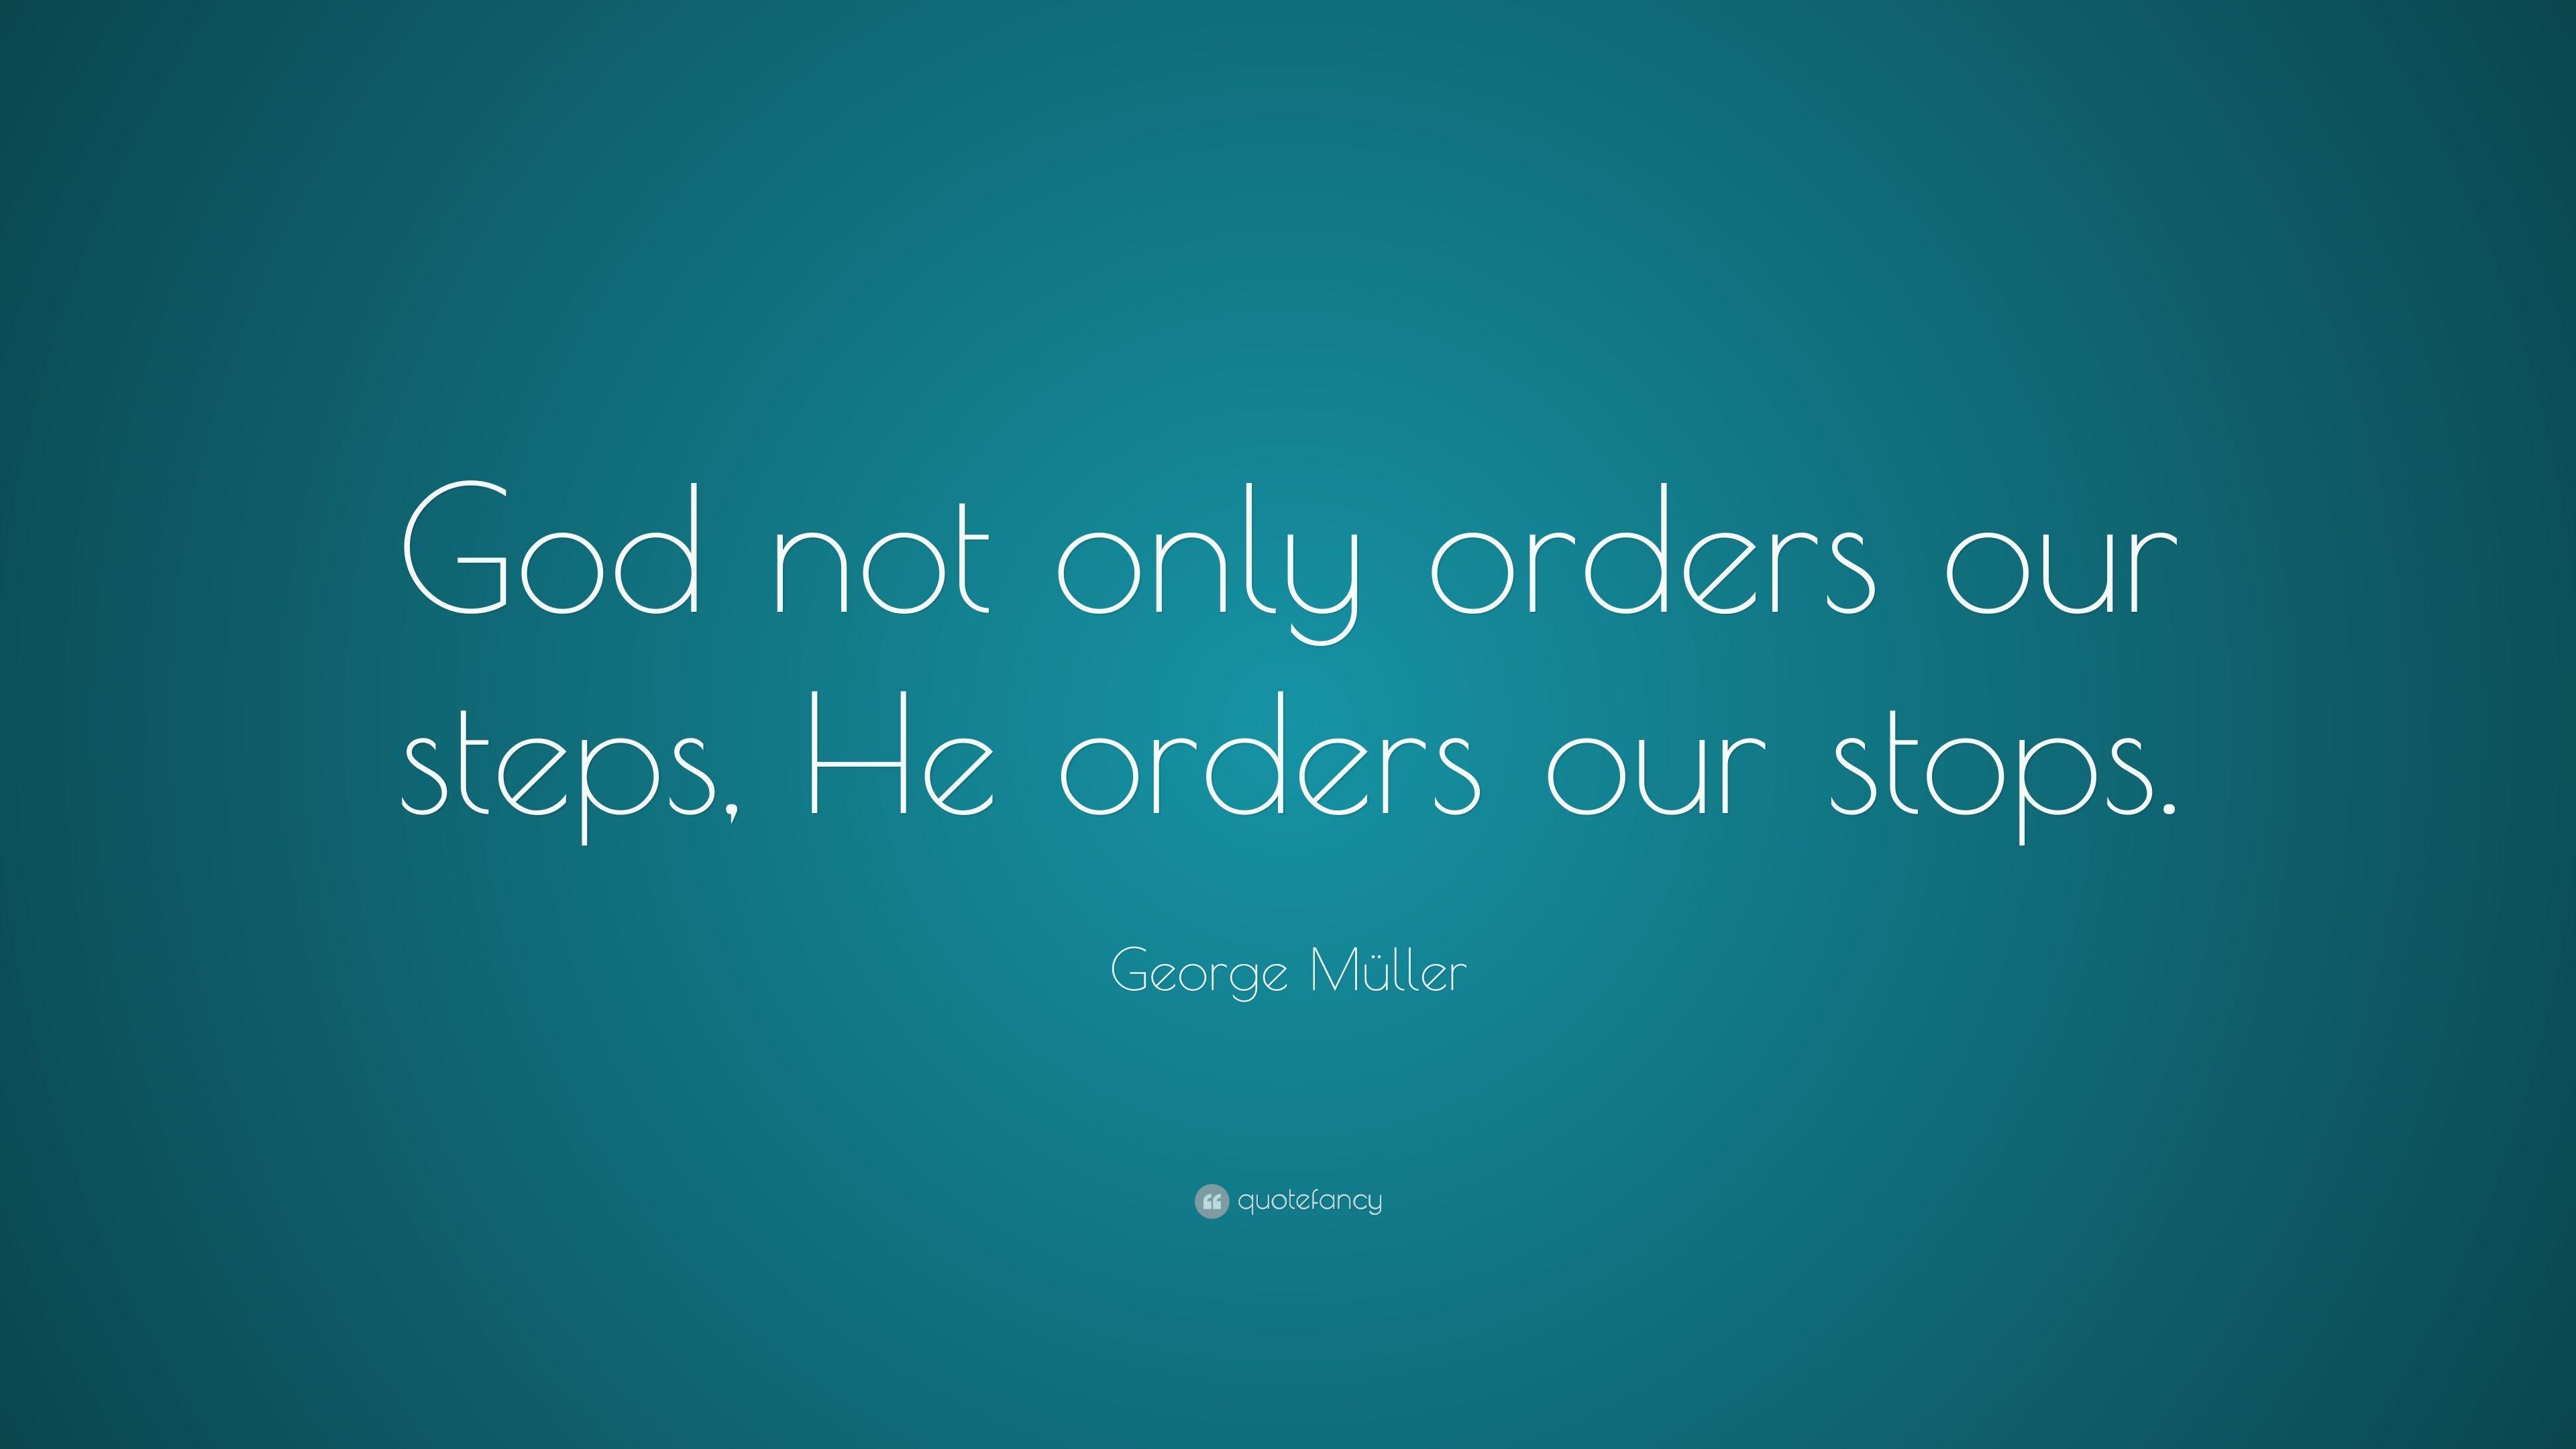 George Müller Quotes (48 wallpaper)